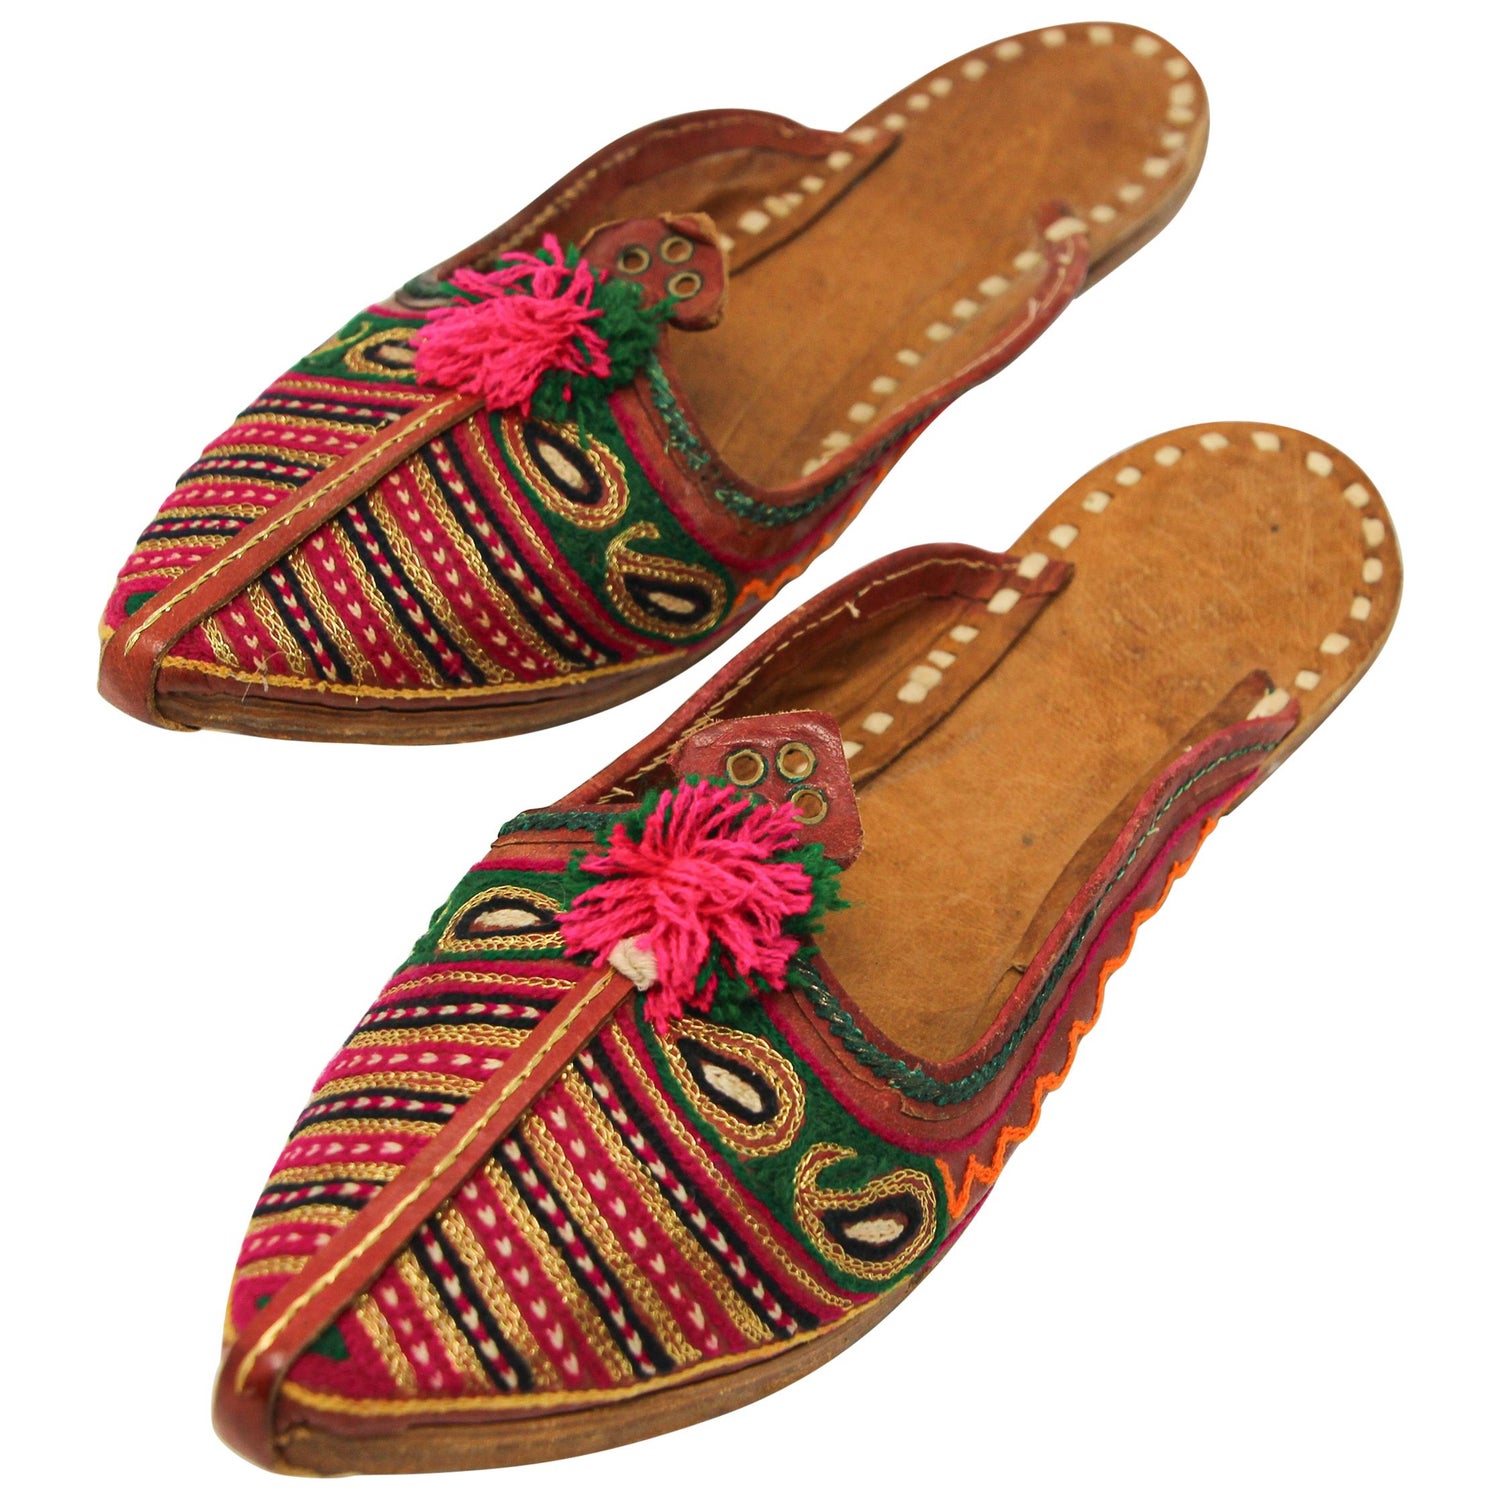 Turkish Shoes - 7 For Sale on 1stDibs | turkey shoes, turkish shoes for sale,  turkish boots for sale